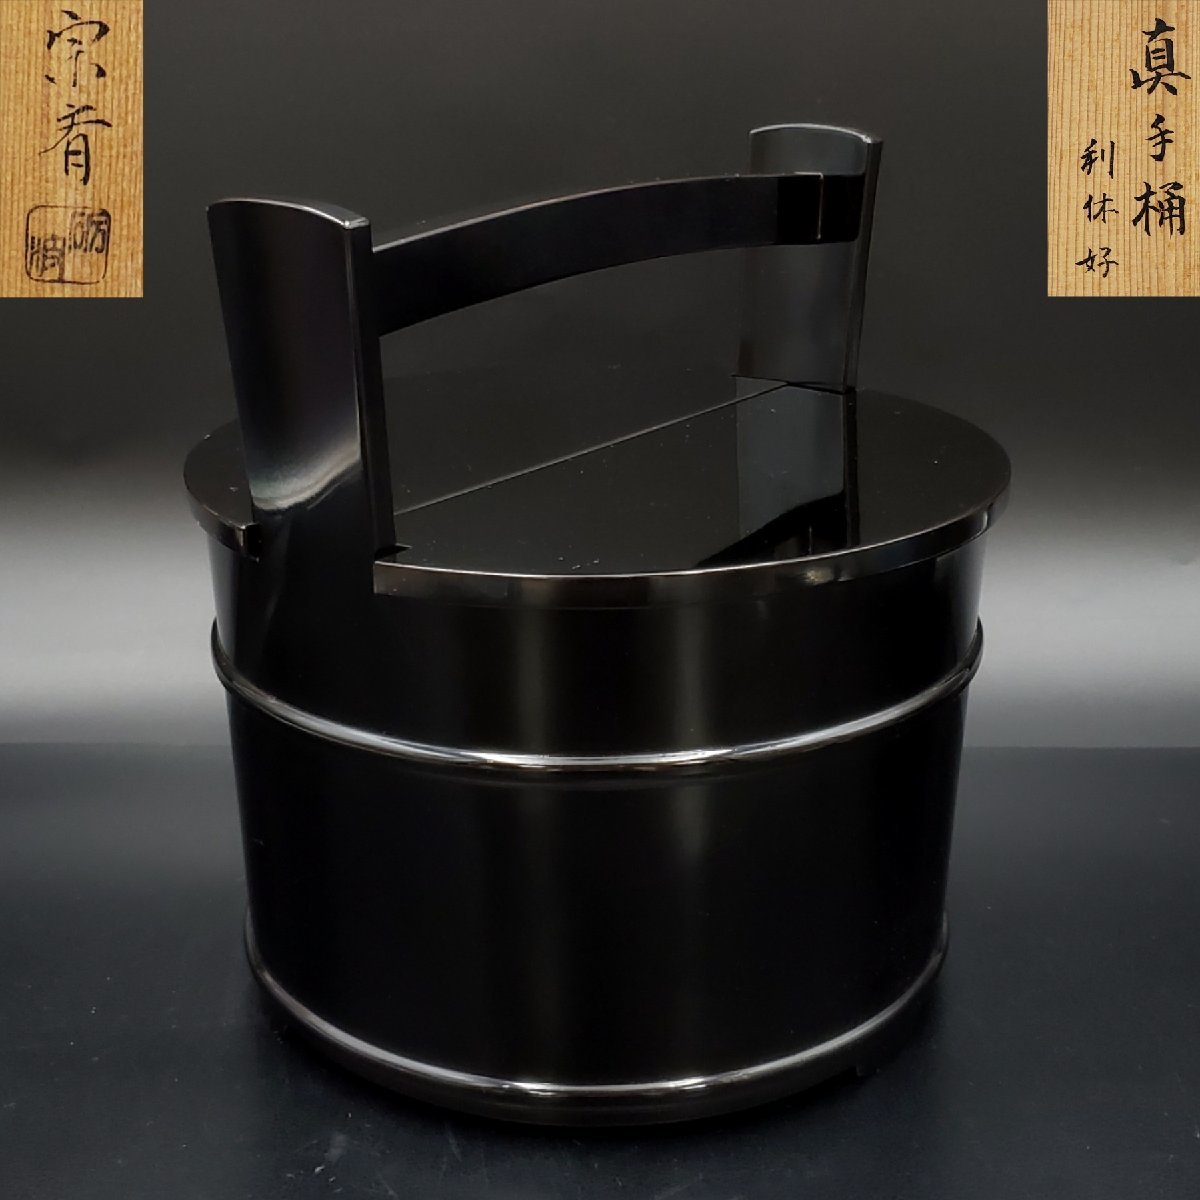 [. warehouse ]. wave .. genuine hand . profit .. tea ceremony water jar 24.5cm tea utensils natural tree lacquer coating lacquer lacquer ware also box 